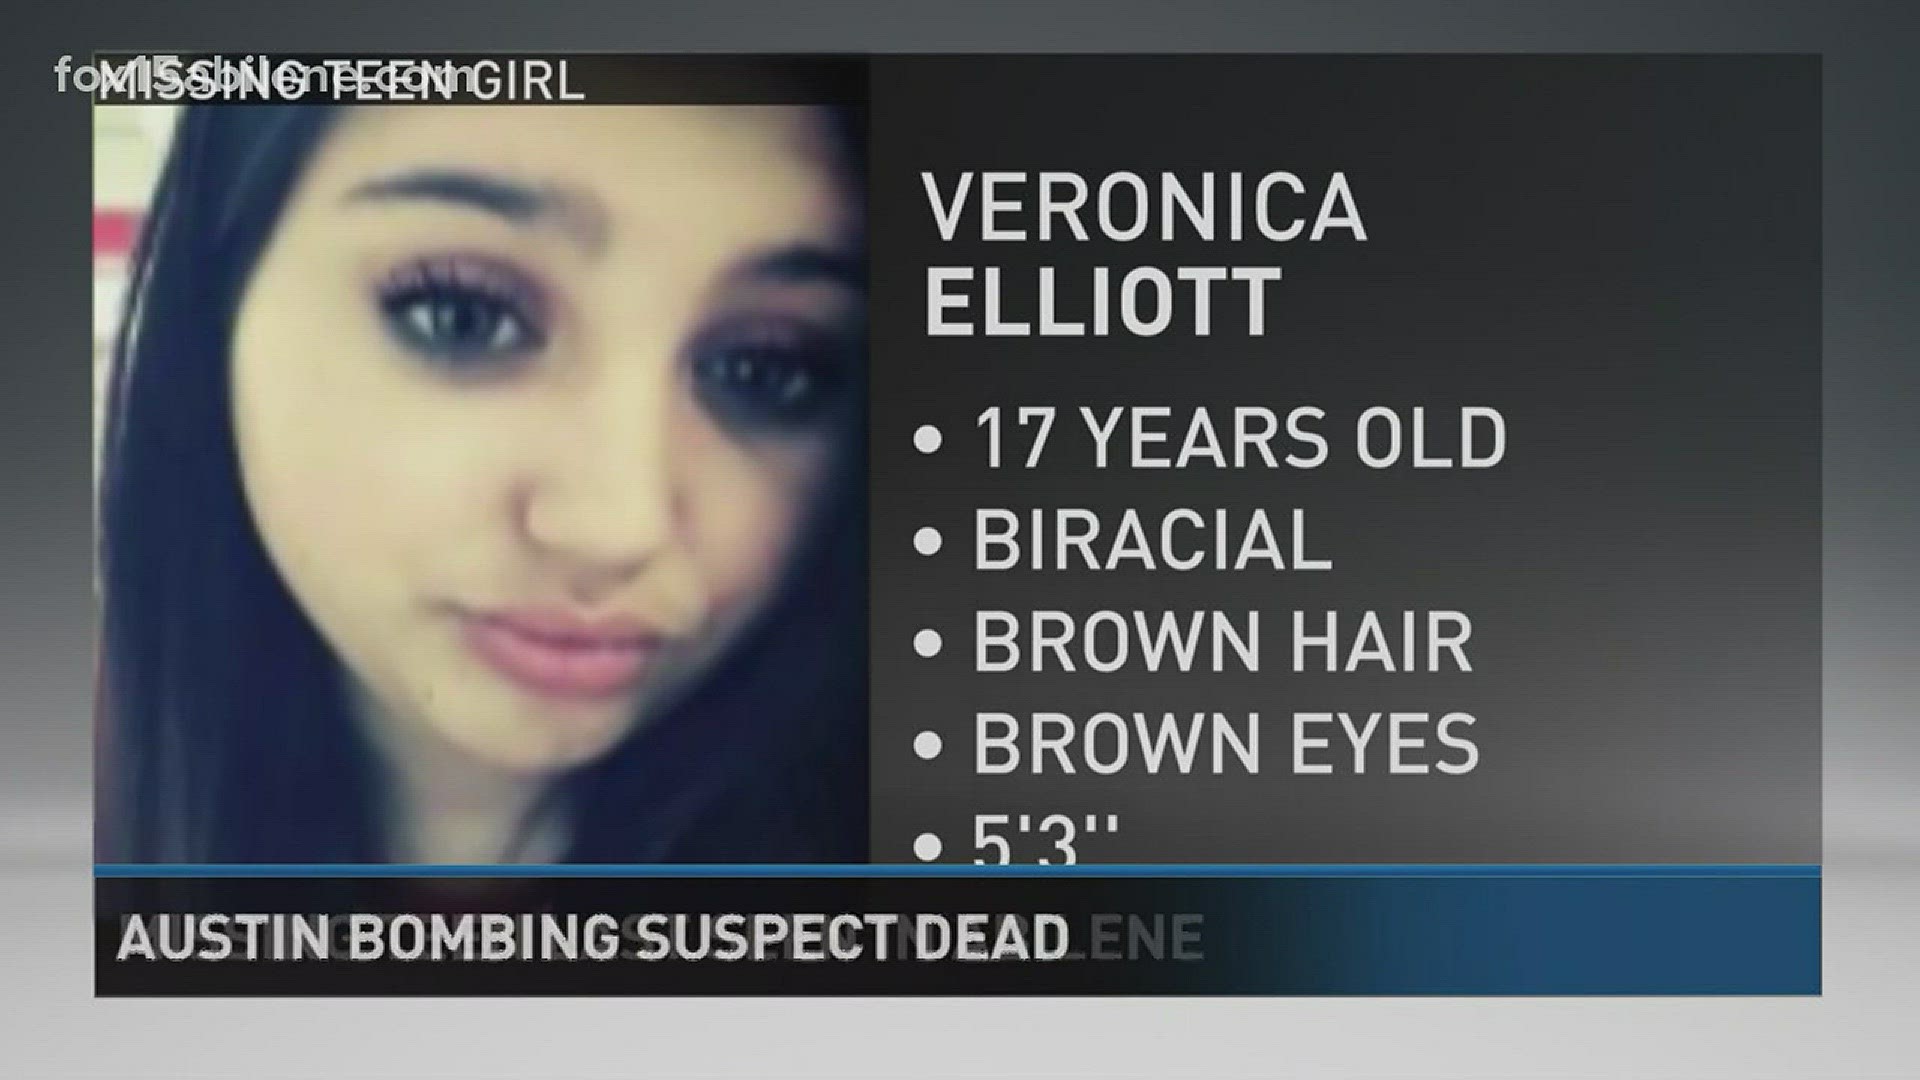 17 year old girl is missing and needs medical attention.